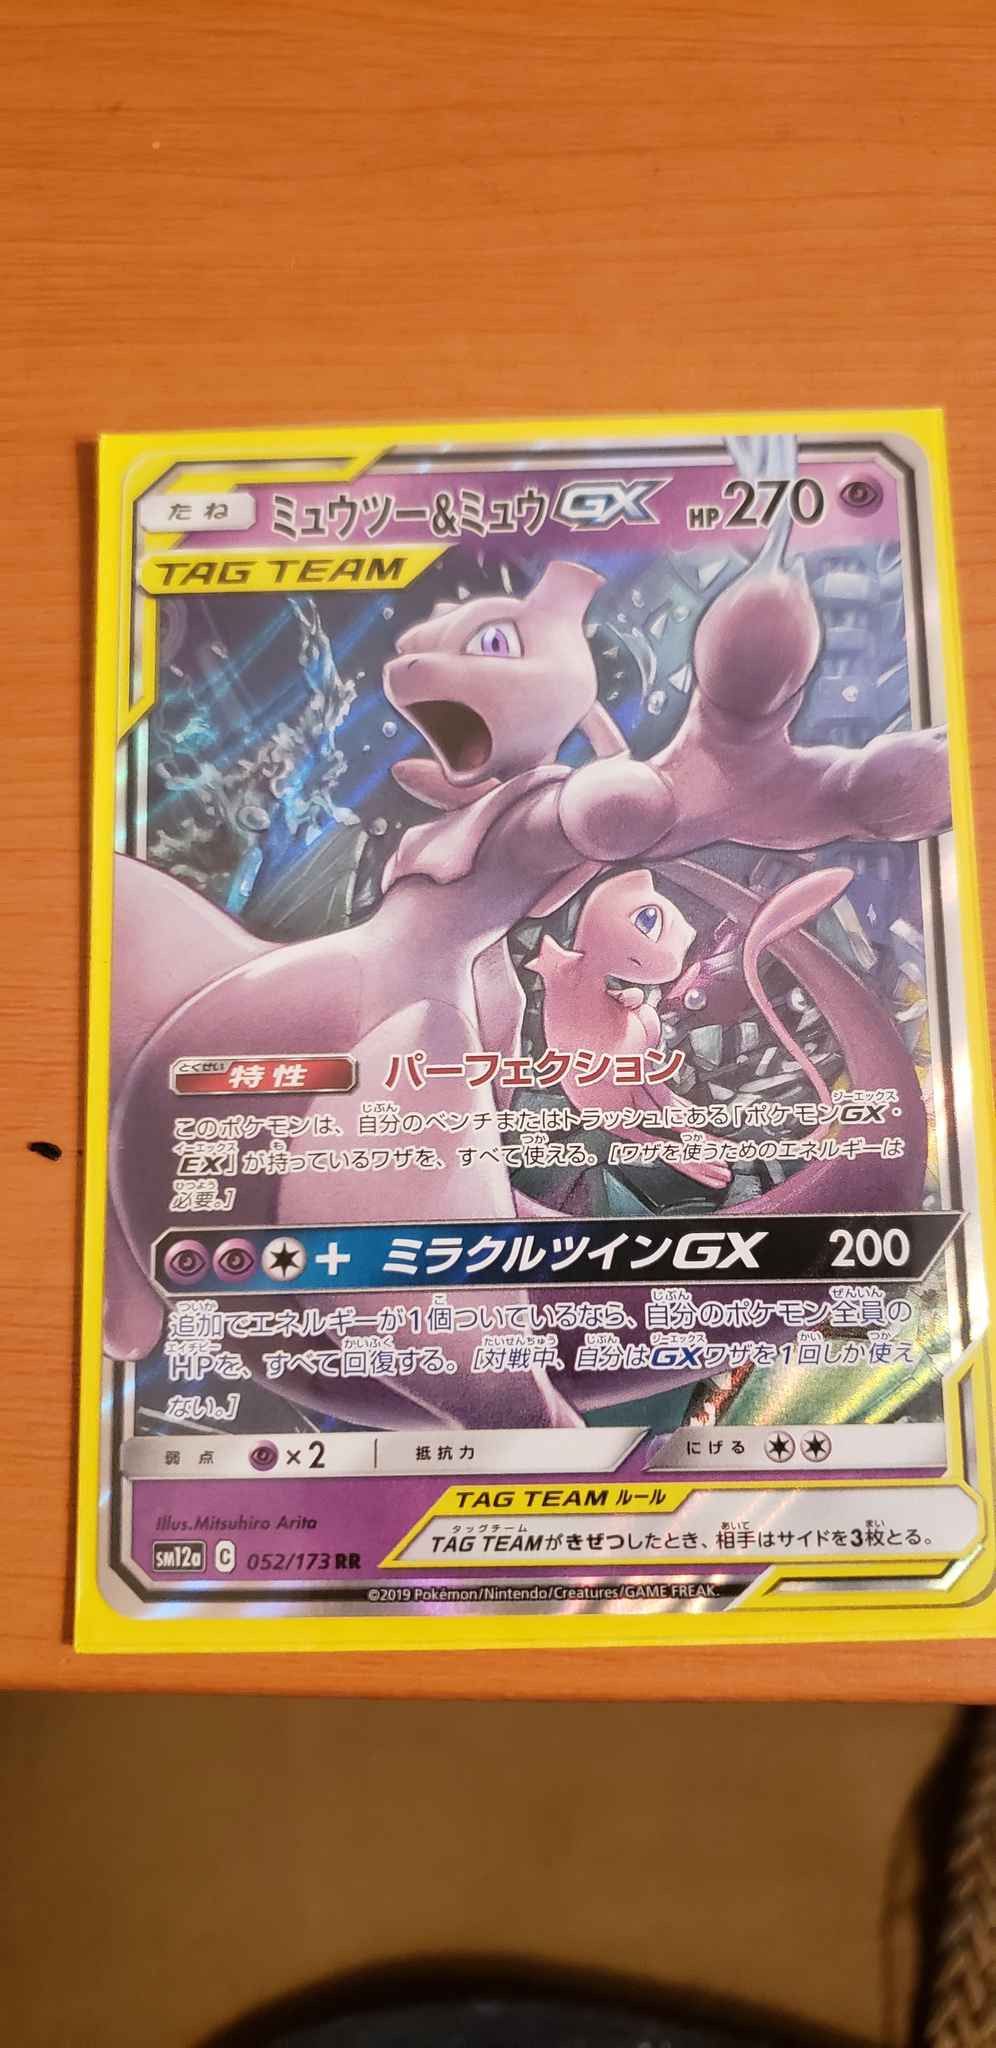 Mewtwo Mew Gx Japanese Version Mewtwo Mew Gx Sm Unified Minds Pokemon Online Gaming Store For Cards Miniatures Singles Packs Booster Boxes